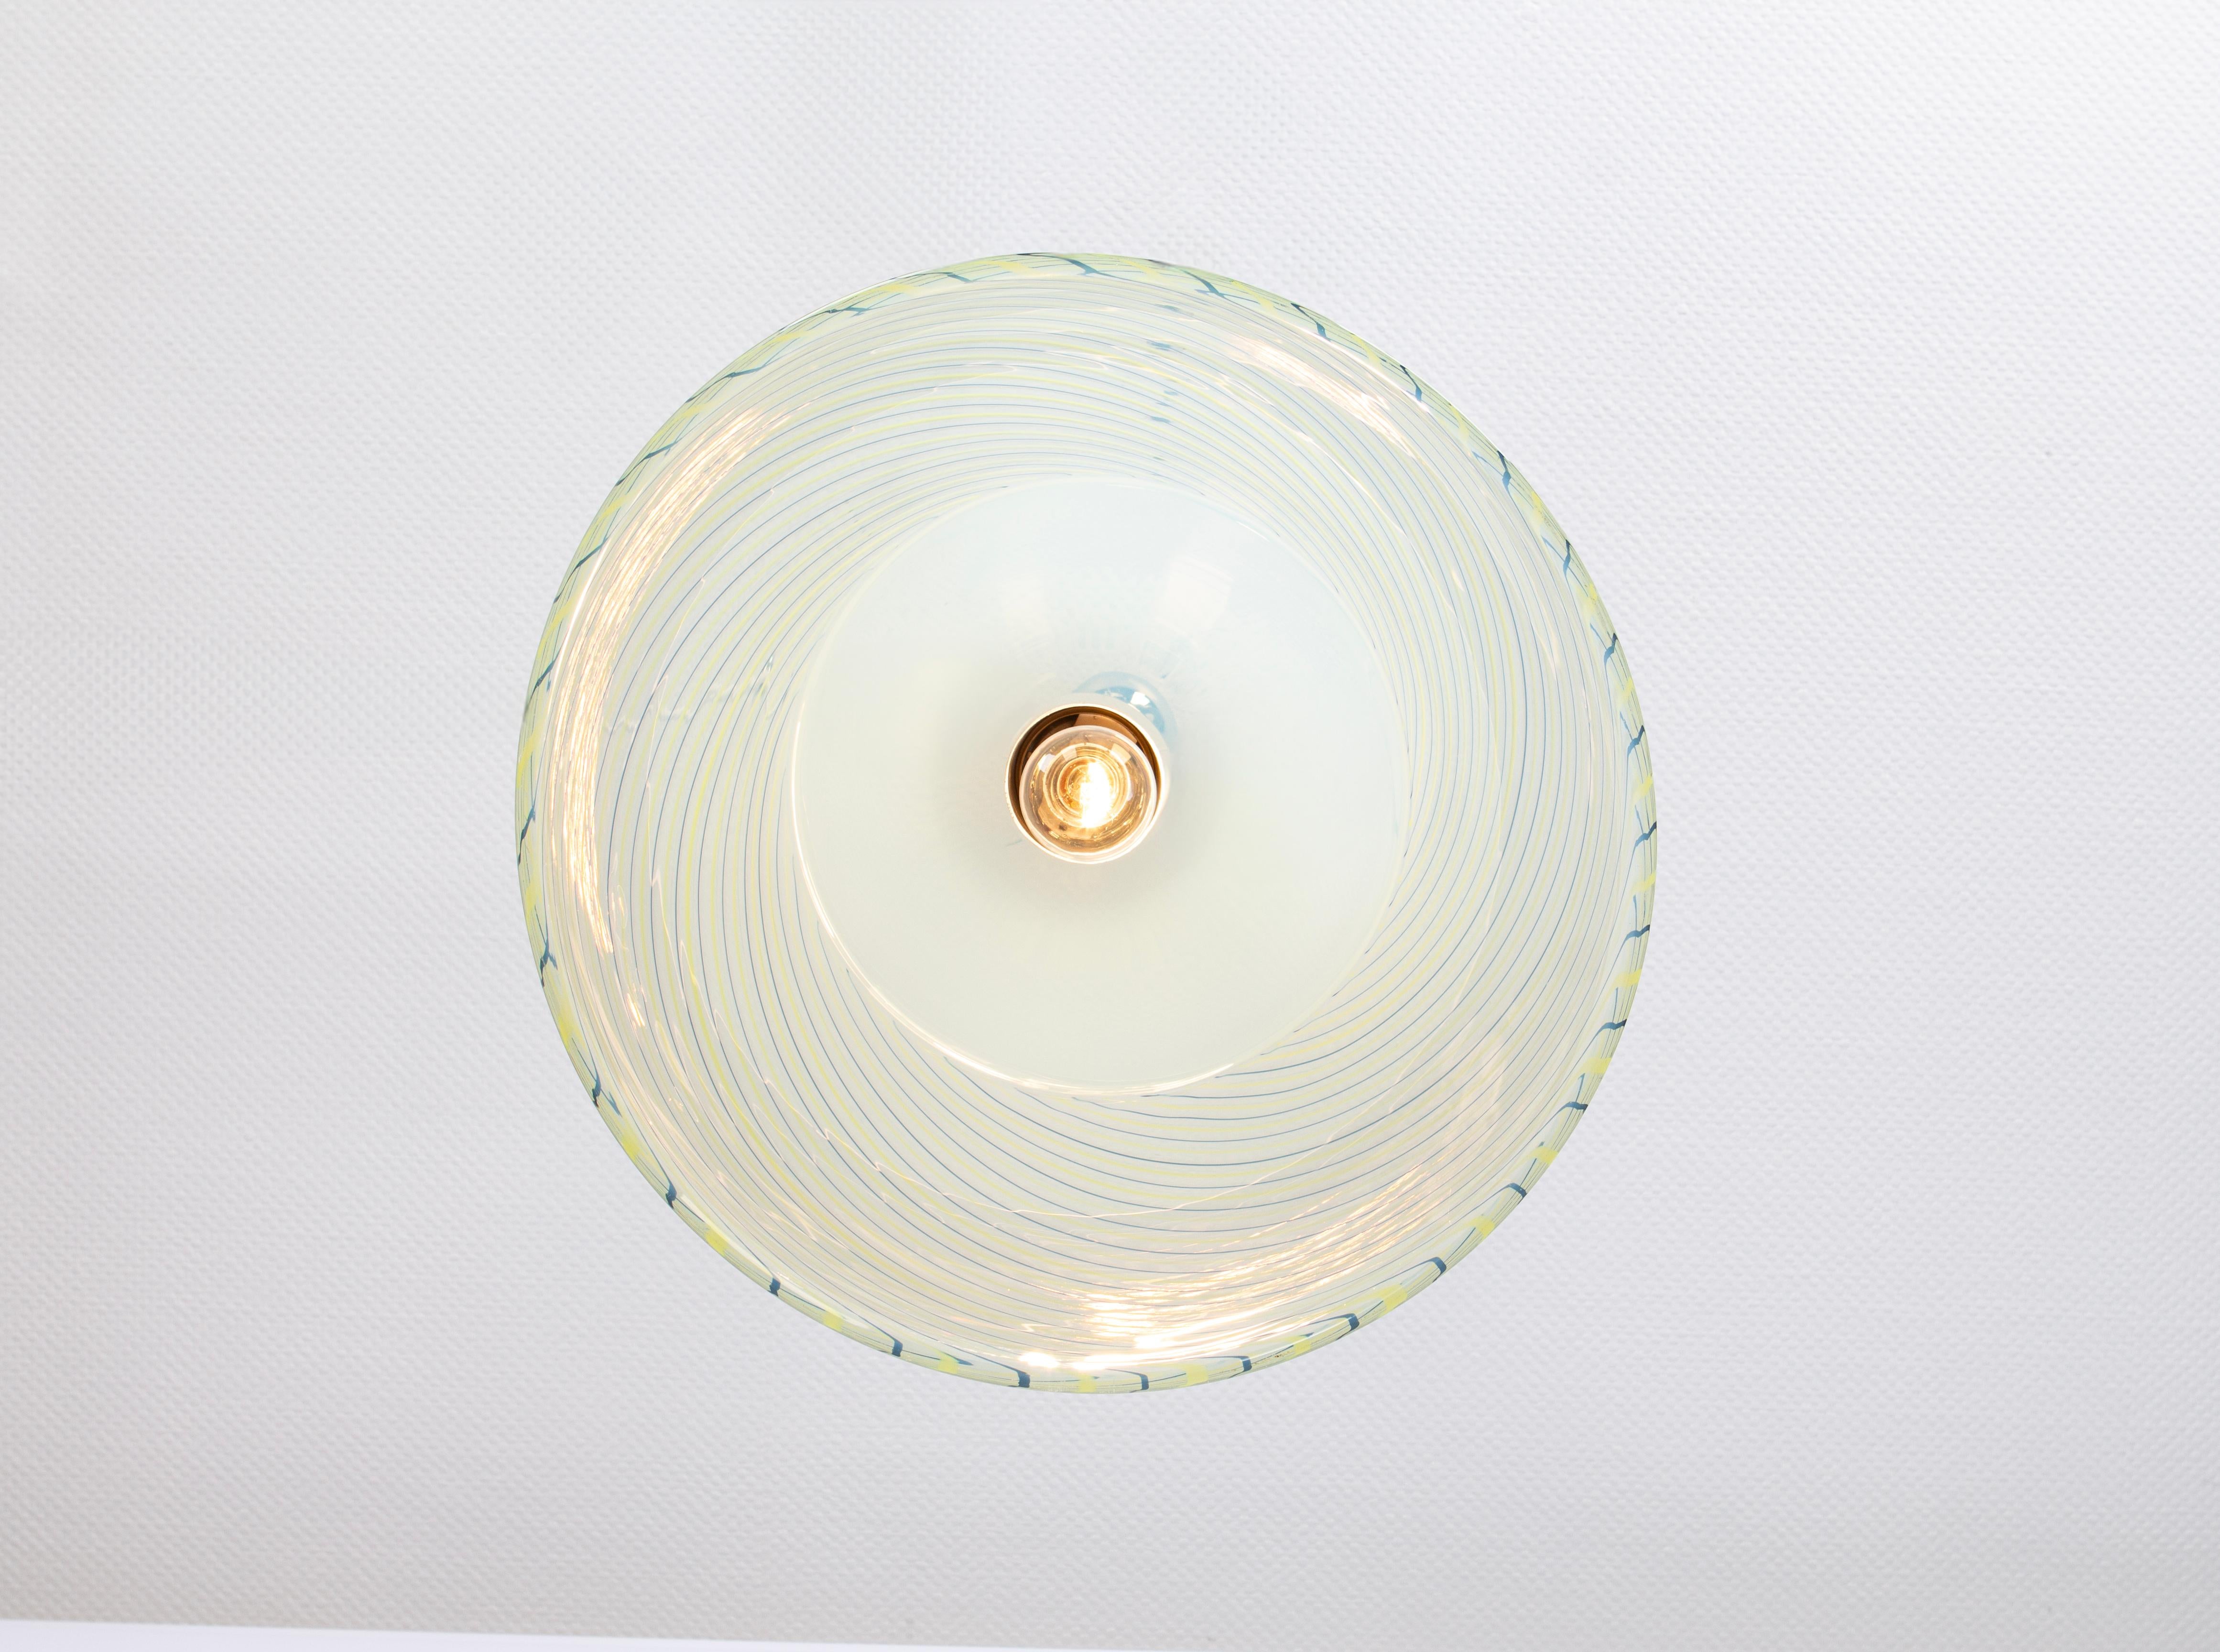 Large Pendant Light in style of Kalmar-Fazzoletto, Italy, 1970s For Sale 1